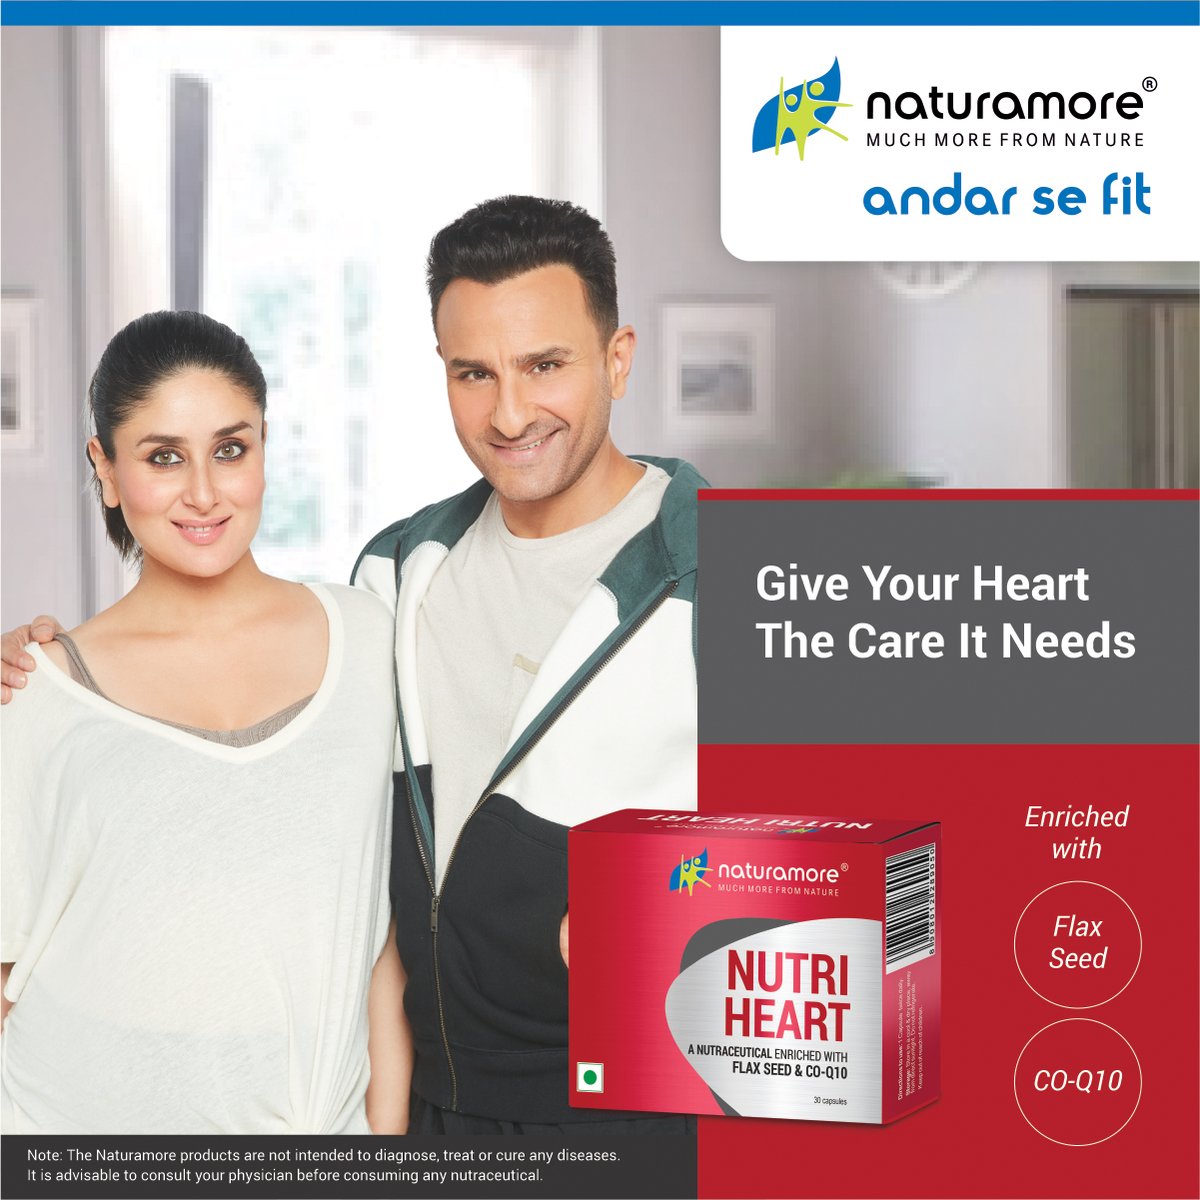 The improved Naturamore Nutri heart contains such nutrients which help in maintaining heart health, balances blood cholesterol levels and maintains optimum health of blood vessels.
Read: https://t.co/PafONrZQD7

#Naturamore #AndarSeFit #NutriHeart #KareenaKapoorKhan #SaifAliKhan https://t.co/GdegAD5s9H